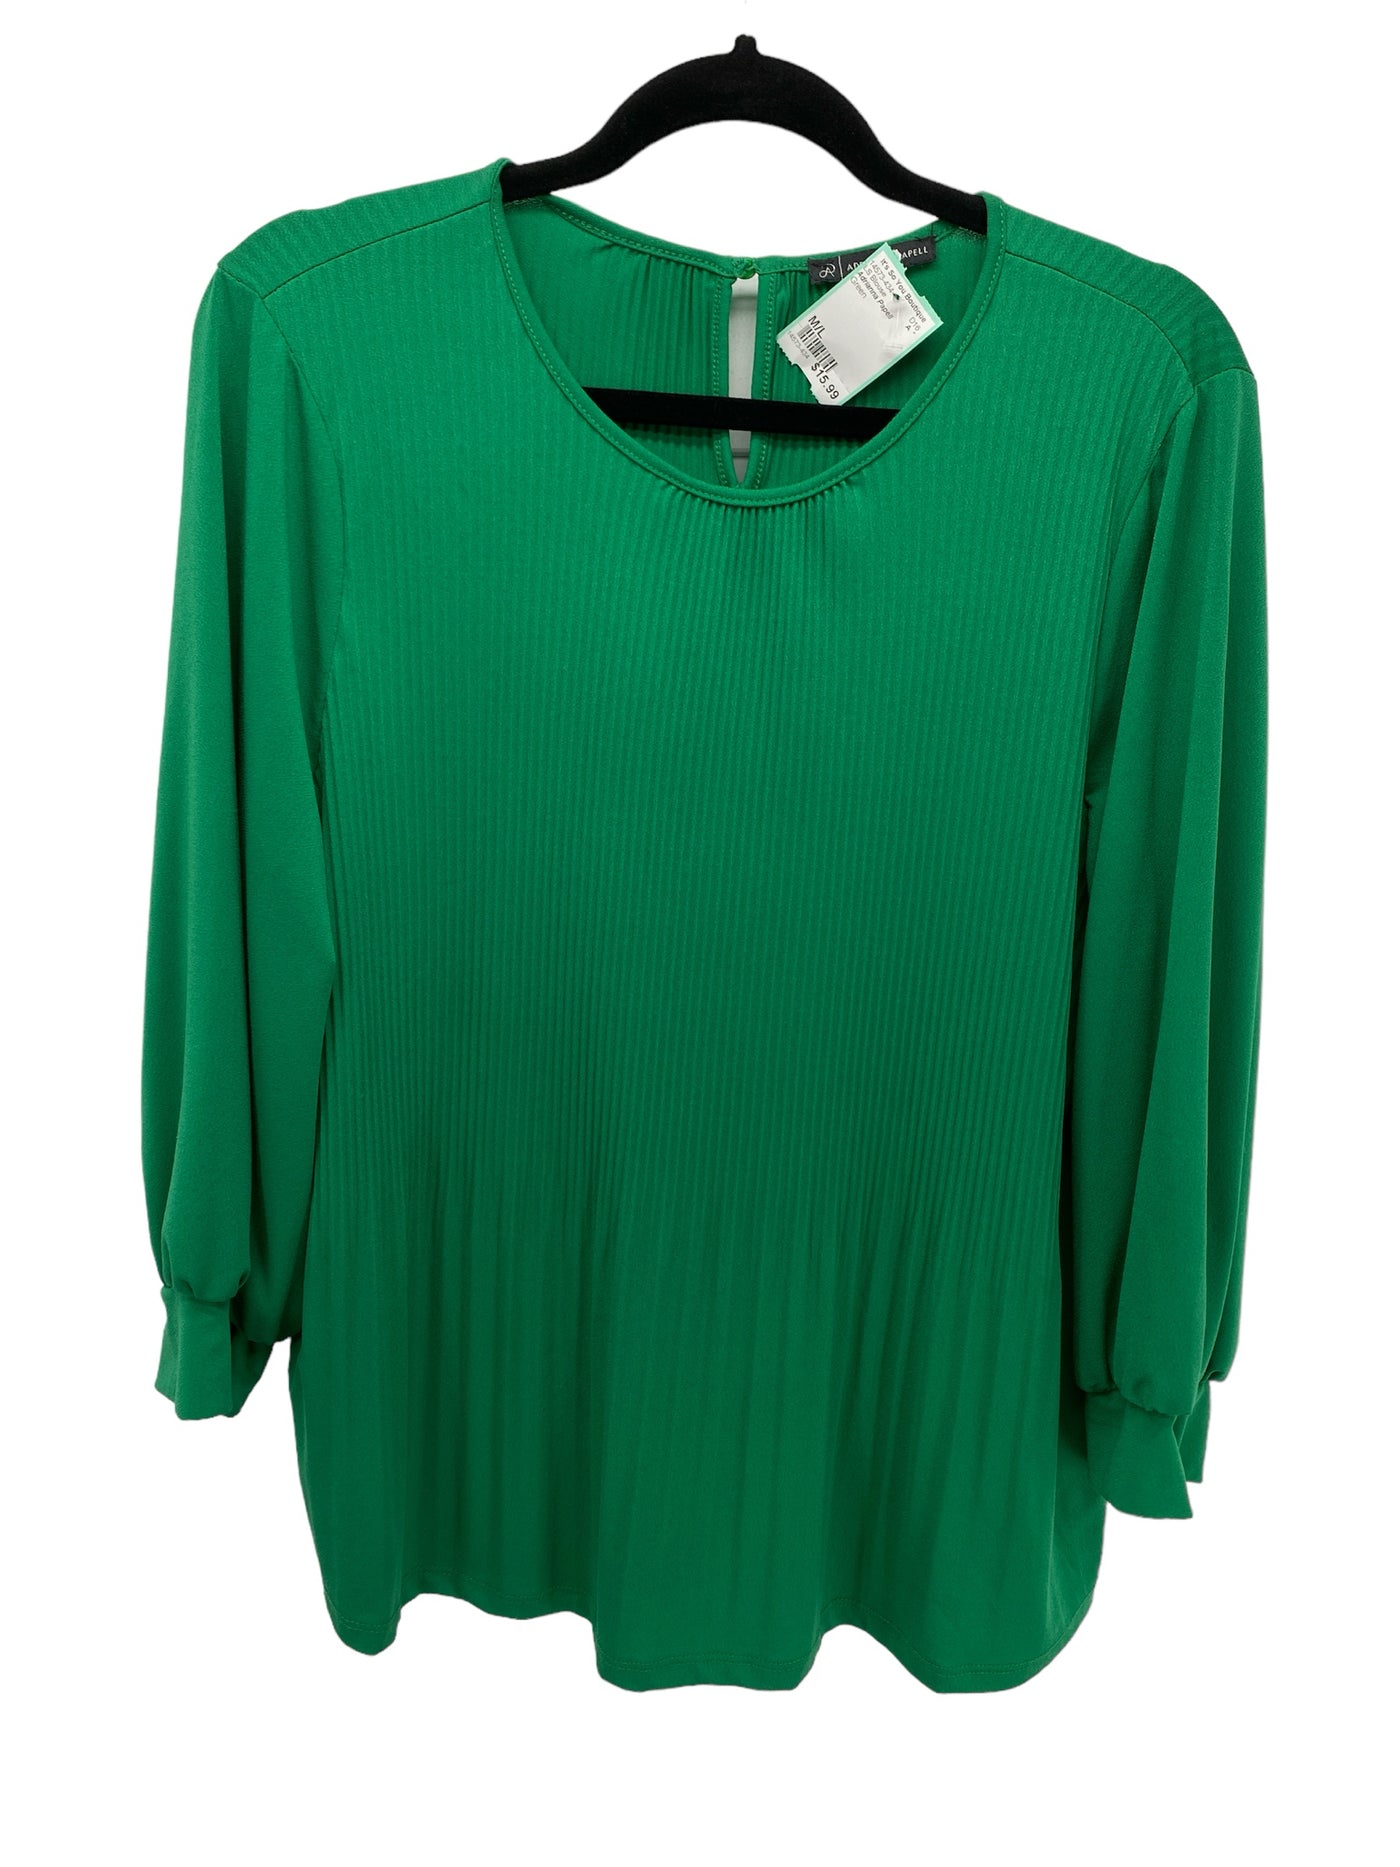 Adrianna Papell Misses Size M/L Green LS Blouse